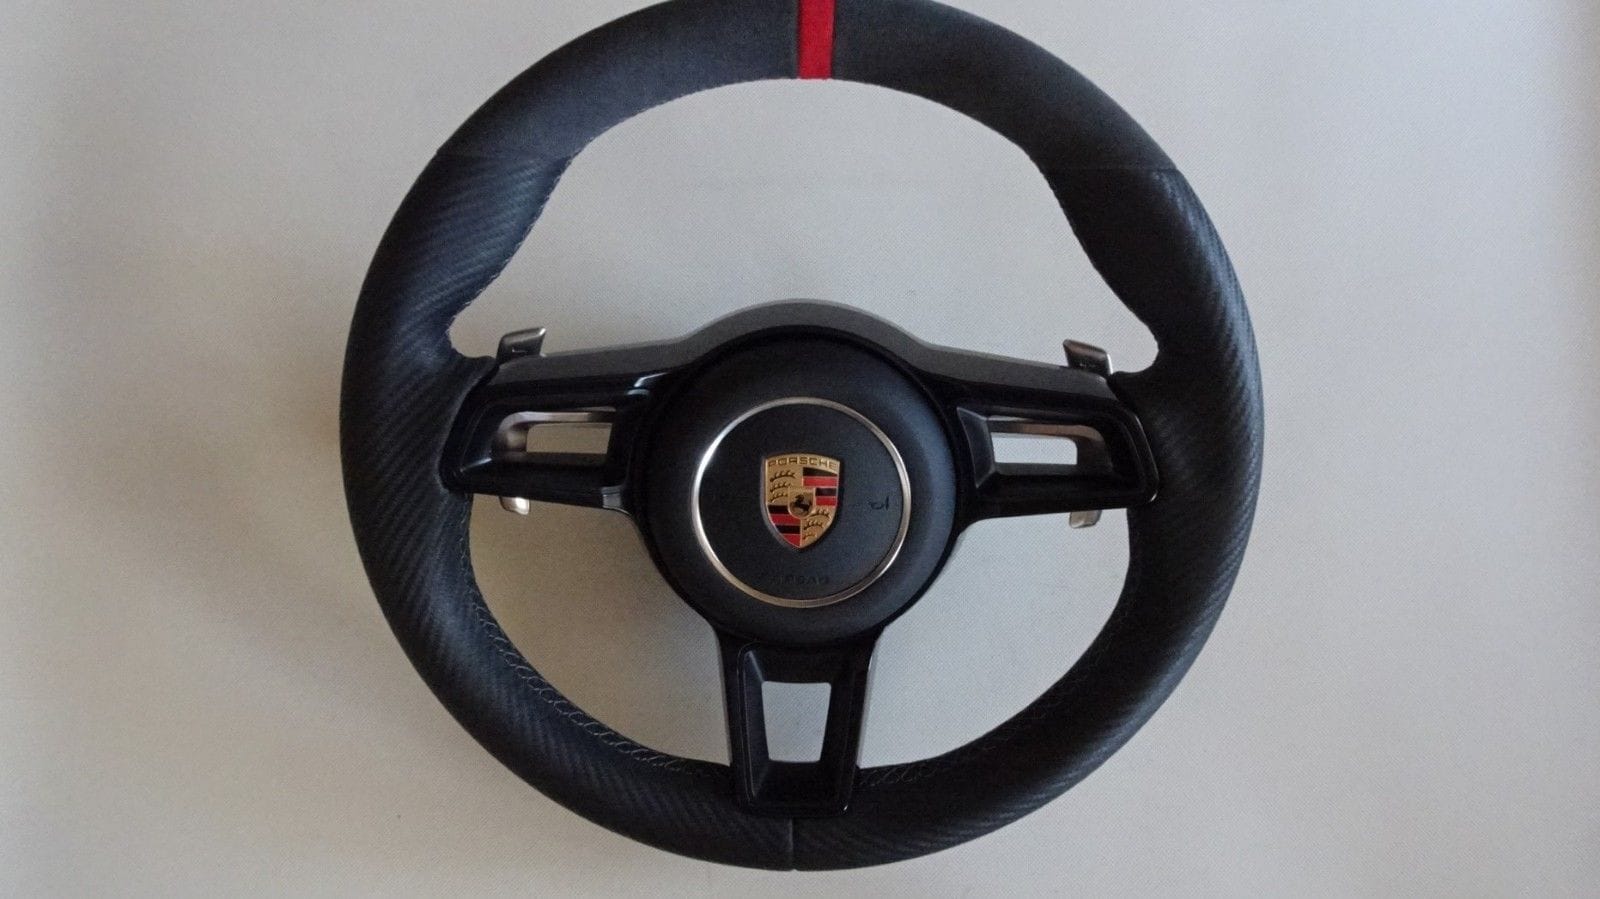 Interior/Upholstery - Alcantara/Carbon 991.2 Steering wheel upgrade (W/ Airbag) PDK - New - 2005 to 2019 Porsche 911 - Spring, TX 77386, United States